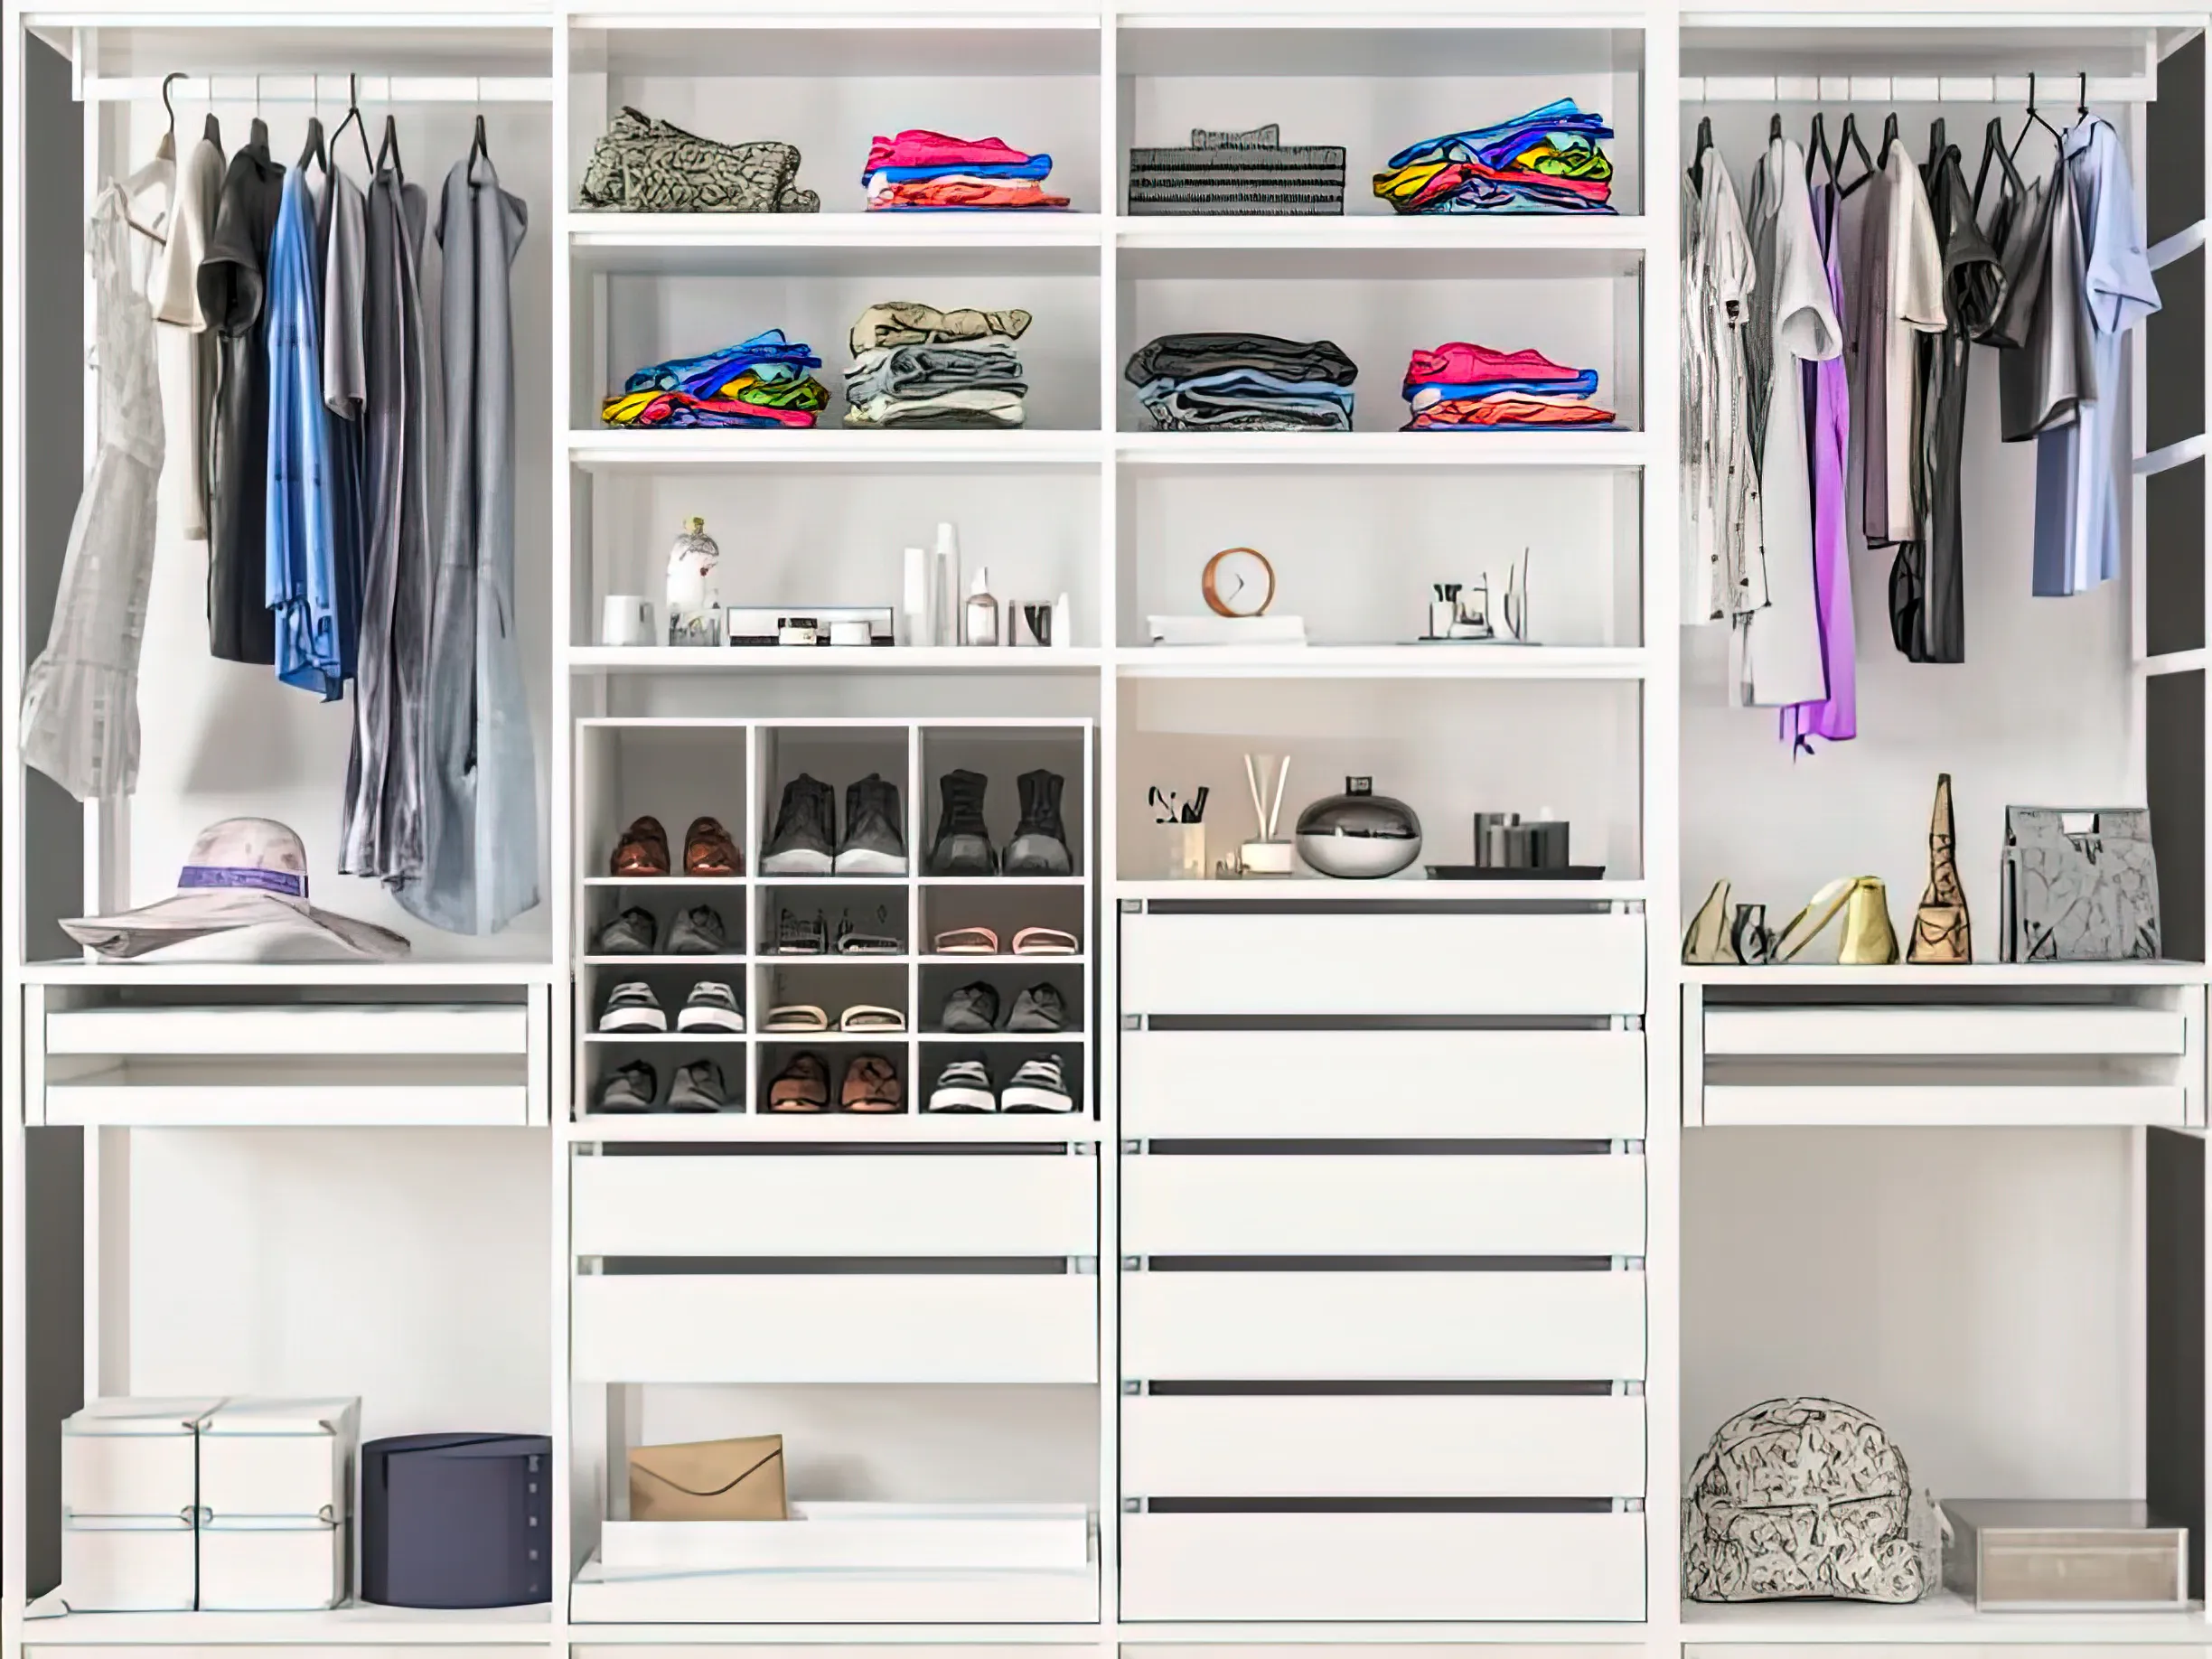 Custom closets are a sought-after feature for many homebuyers.